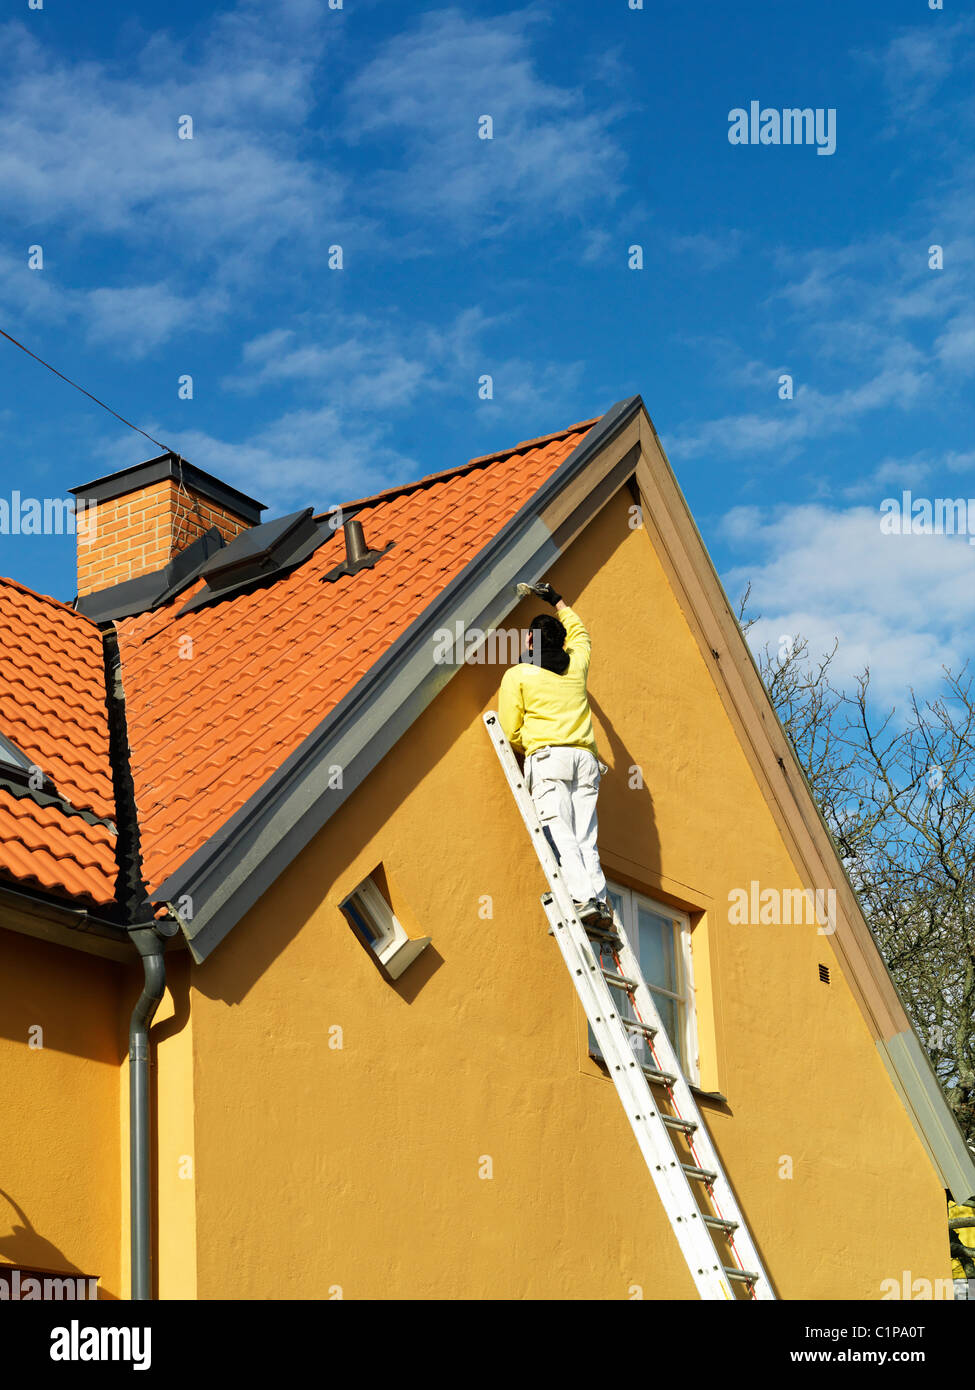 Man painting gable, low angle view Banque D'Images